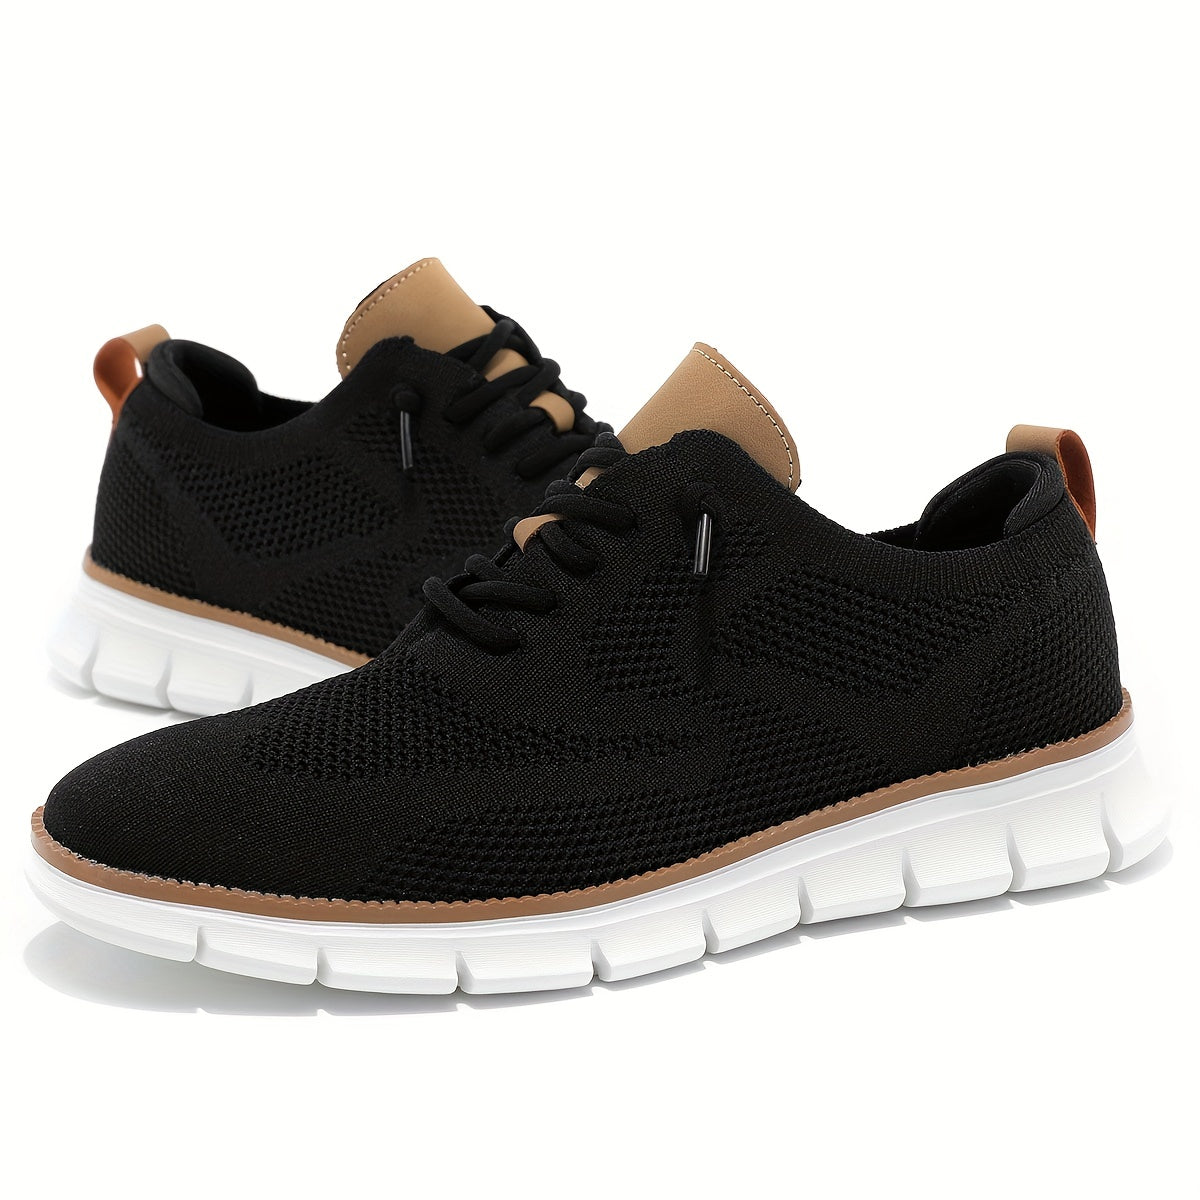 Men's Lace-up Sneakers - Athletic Shoes - Lightweight And Breathable